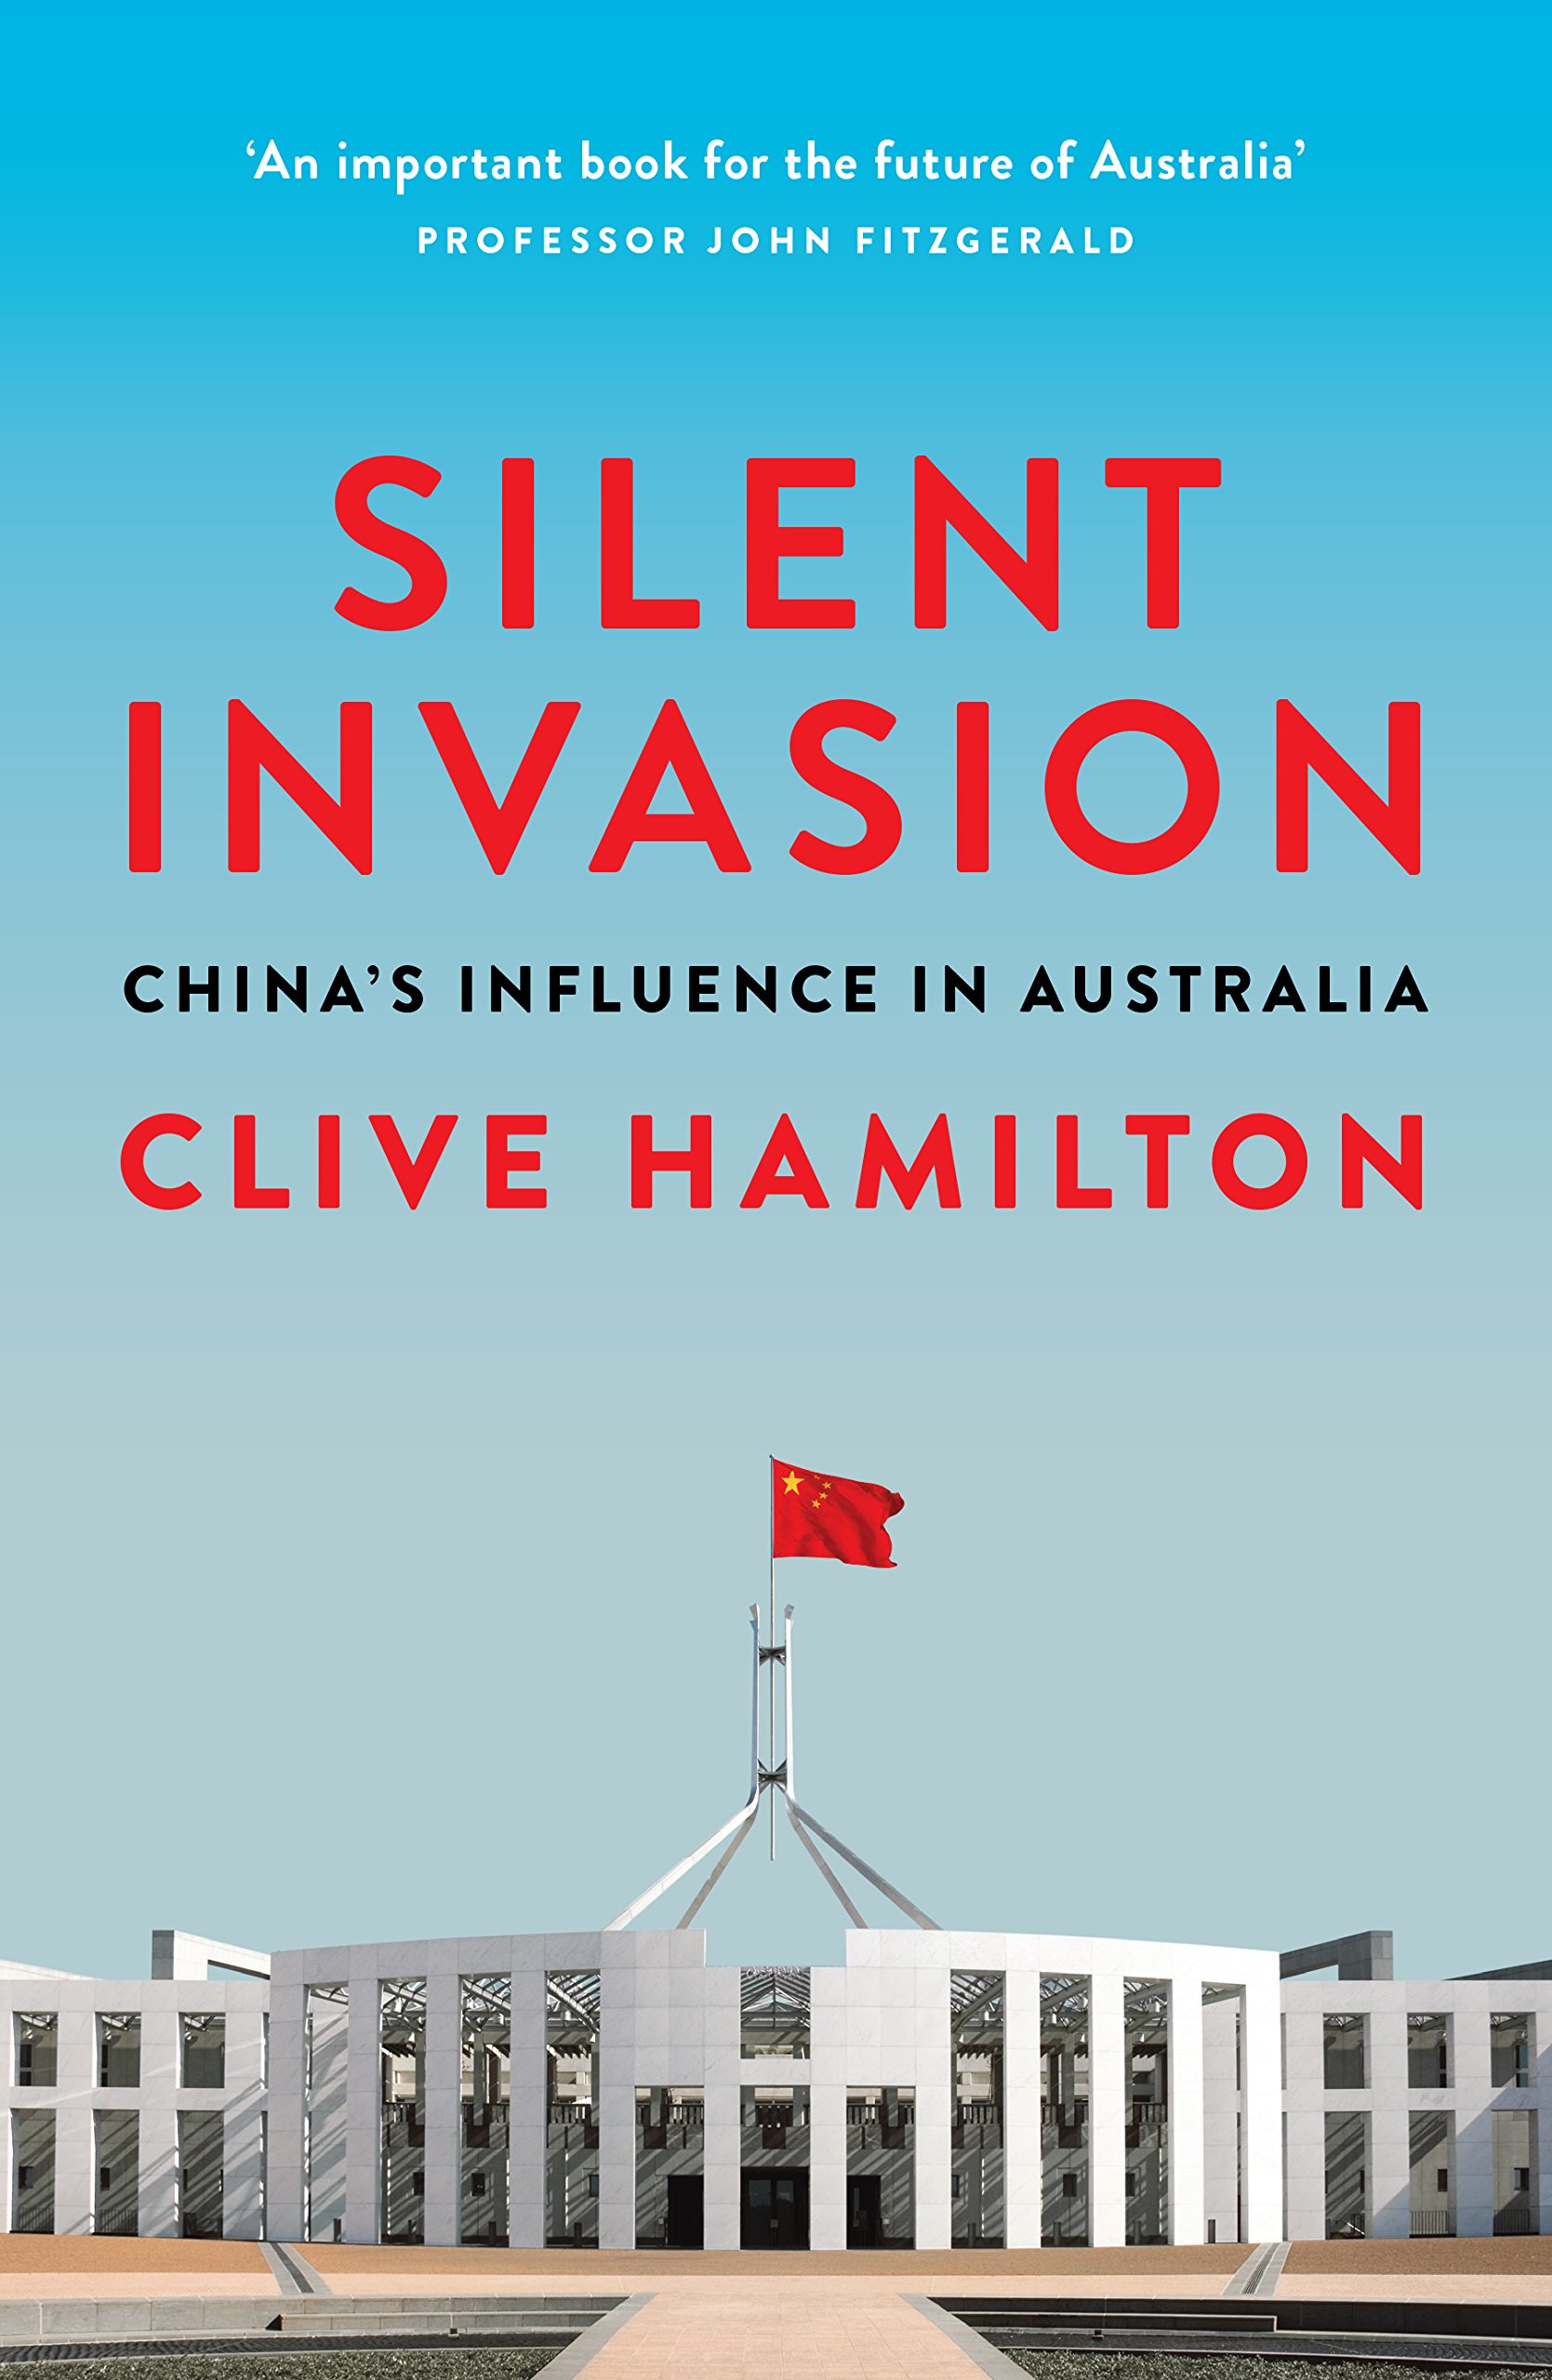 [BOOK REVIEW] ‘Silent Invasion: China’s Influence in Australia’